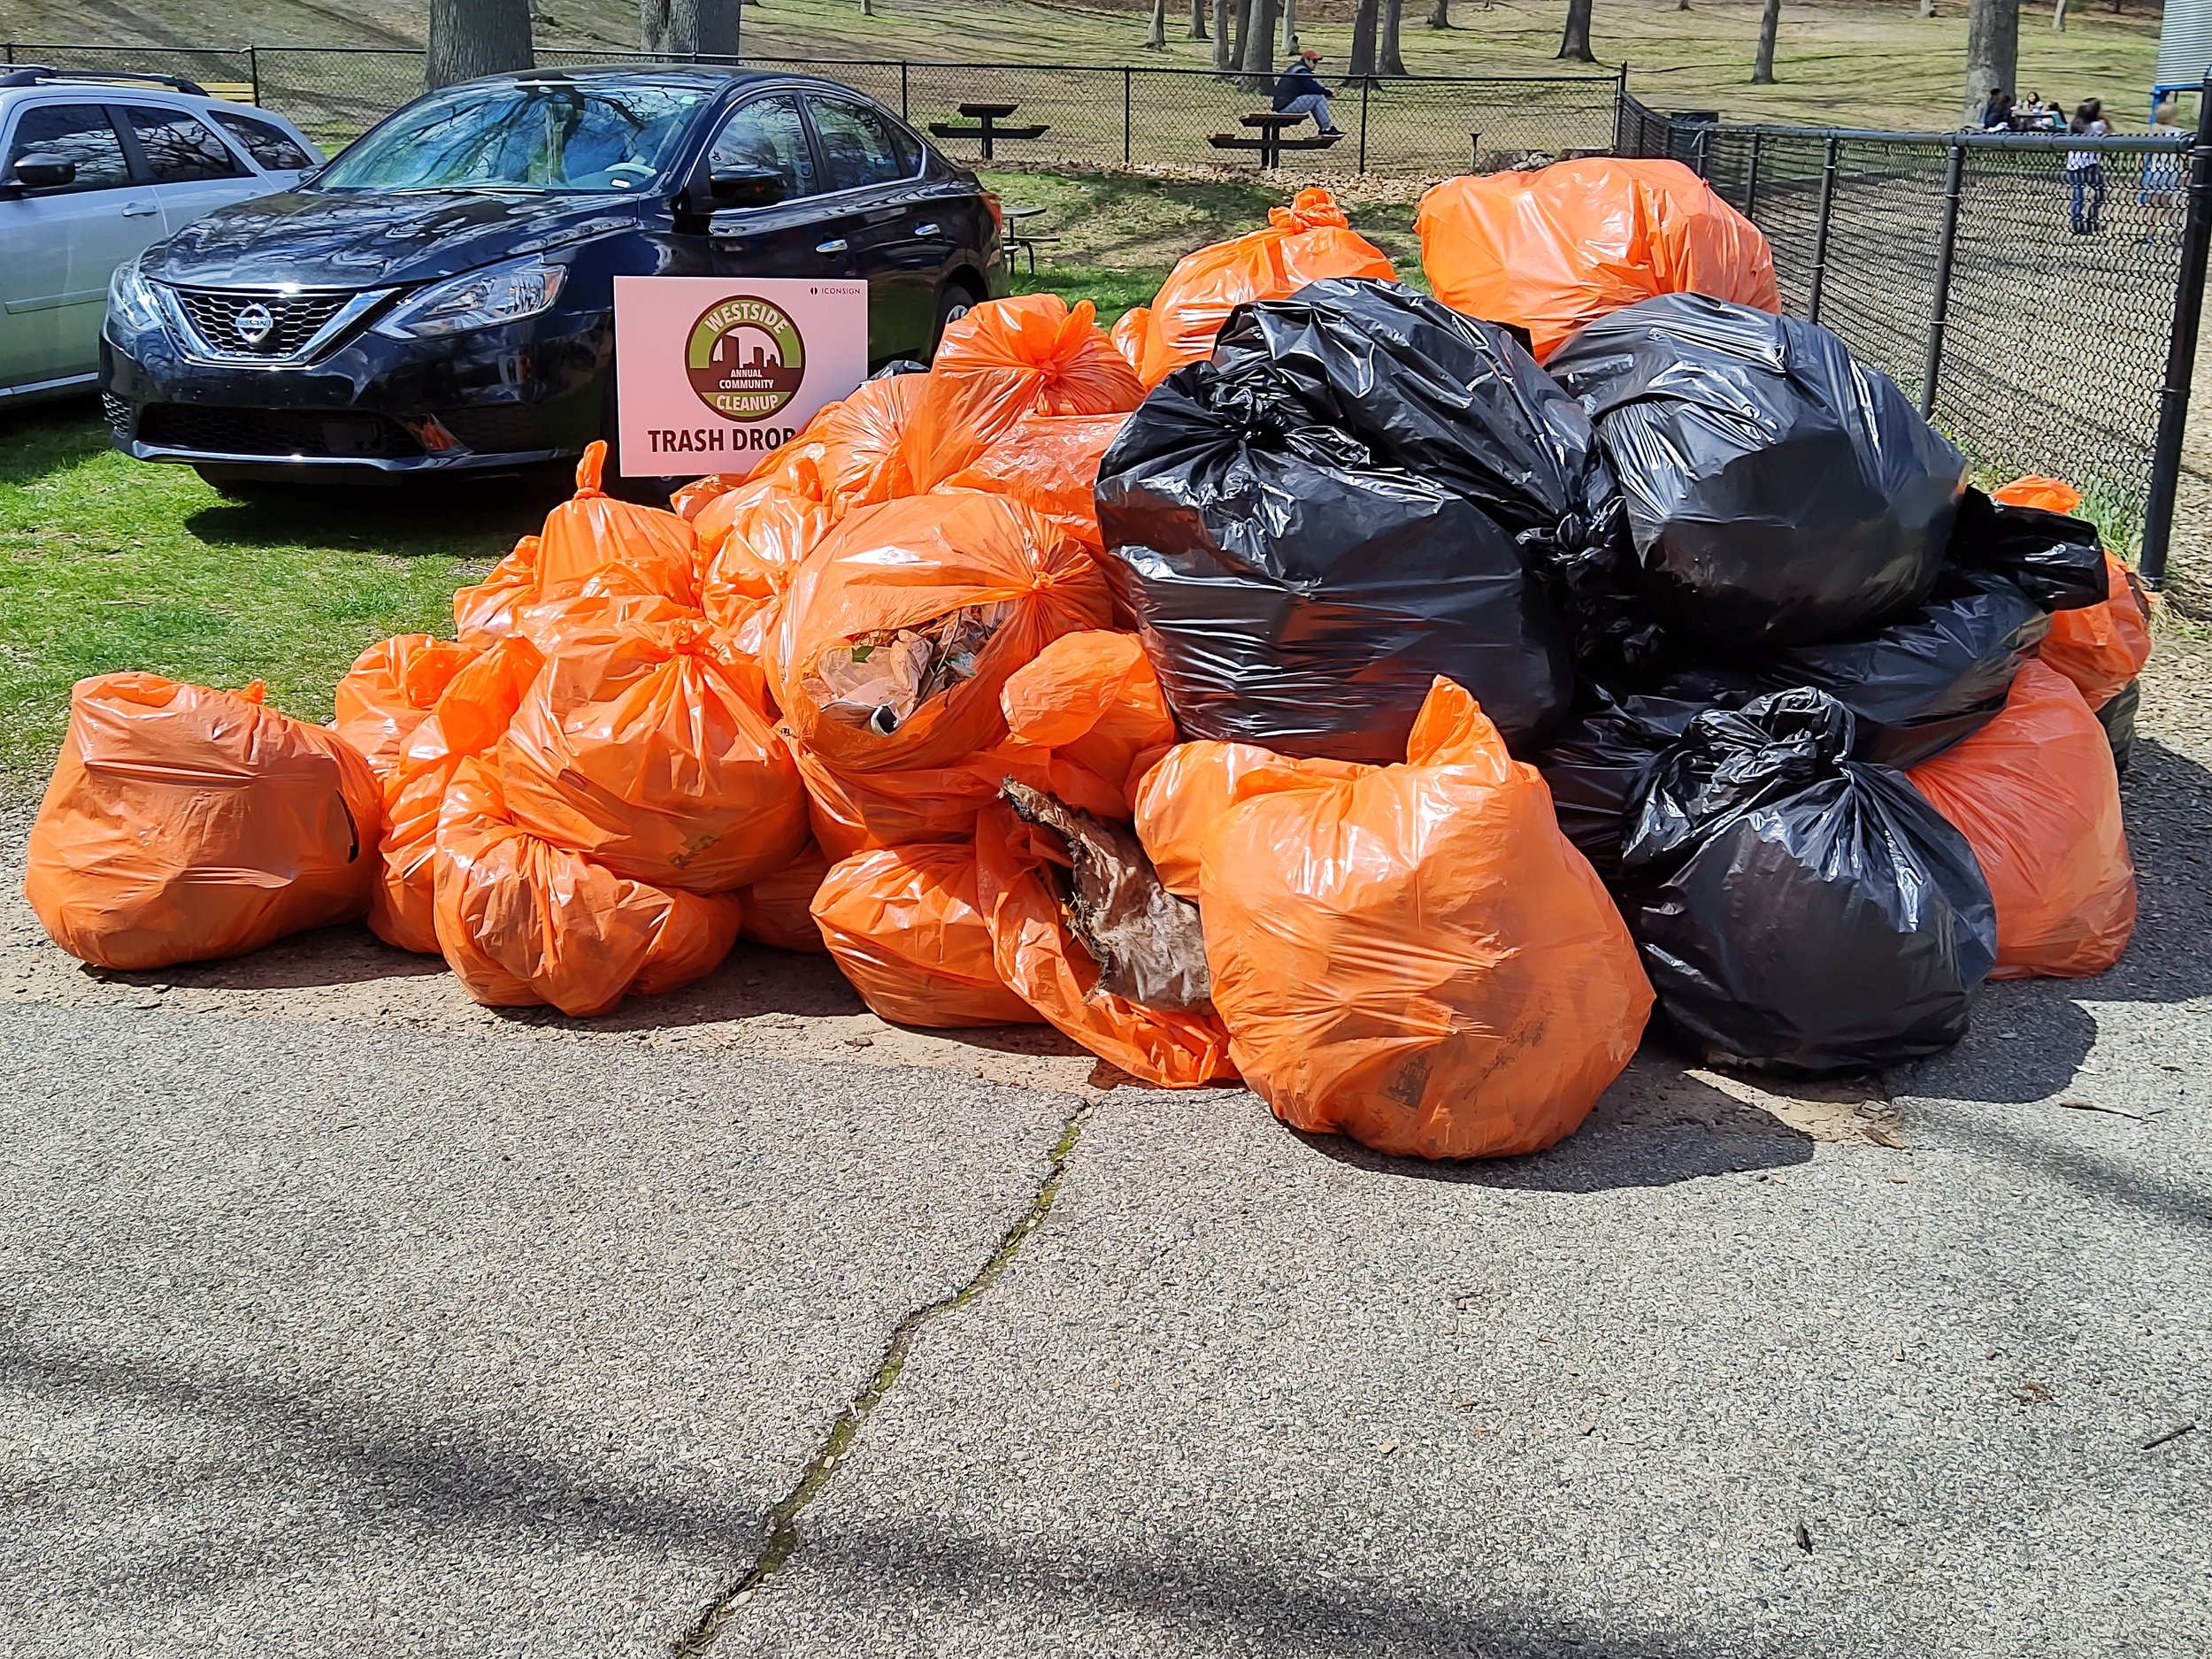 Some of the trash collected in the West Grand Neighborhood